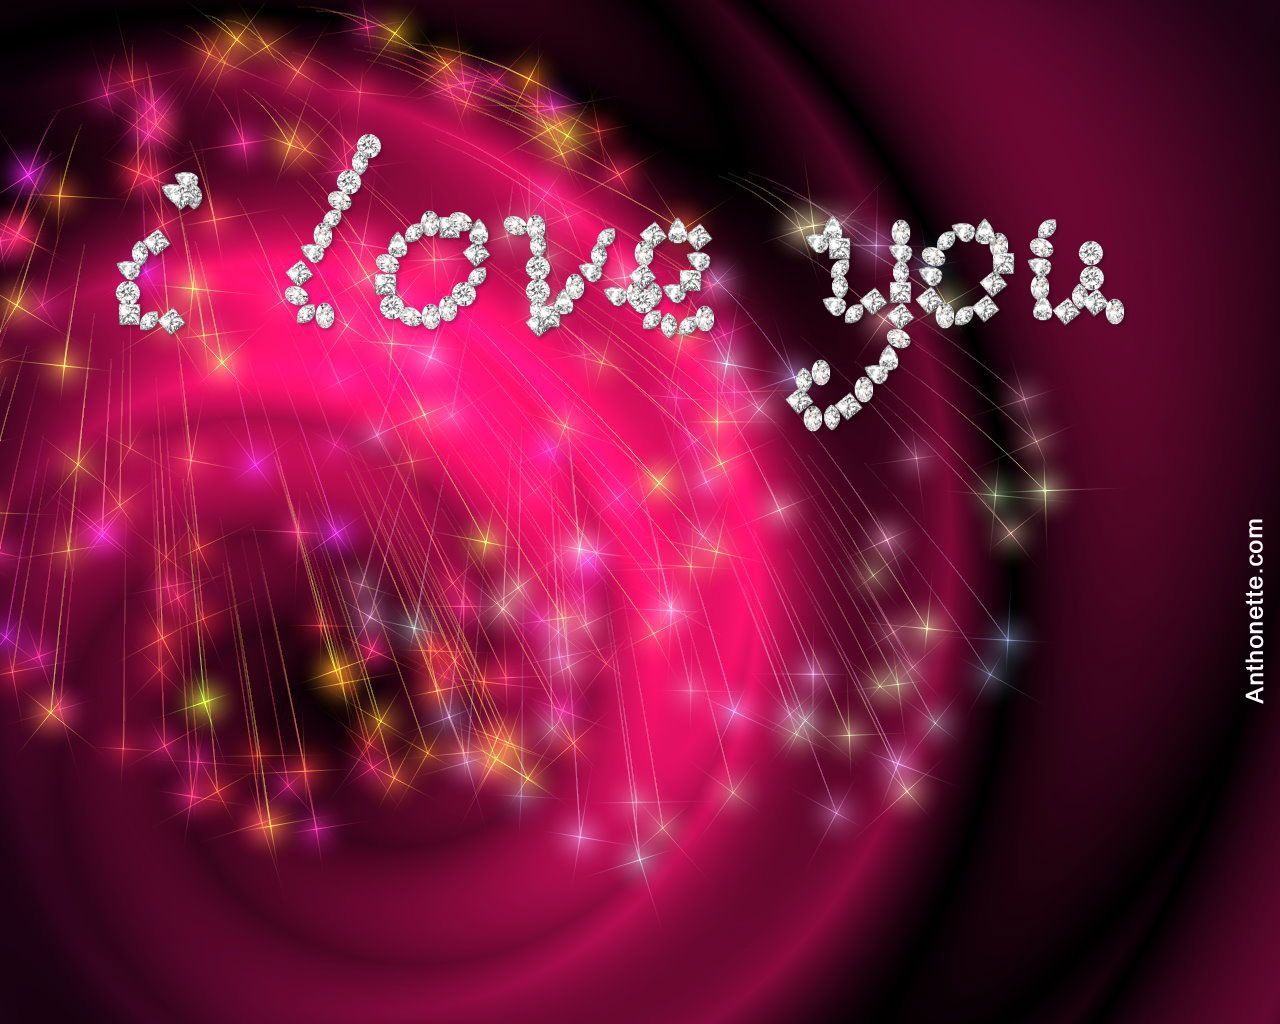 Love You Images Wallpapers Group 74